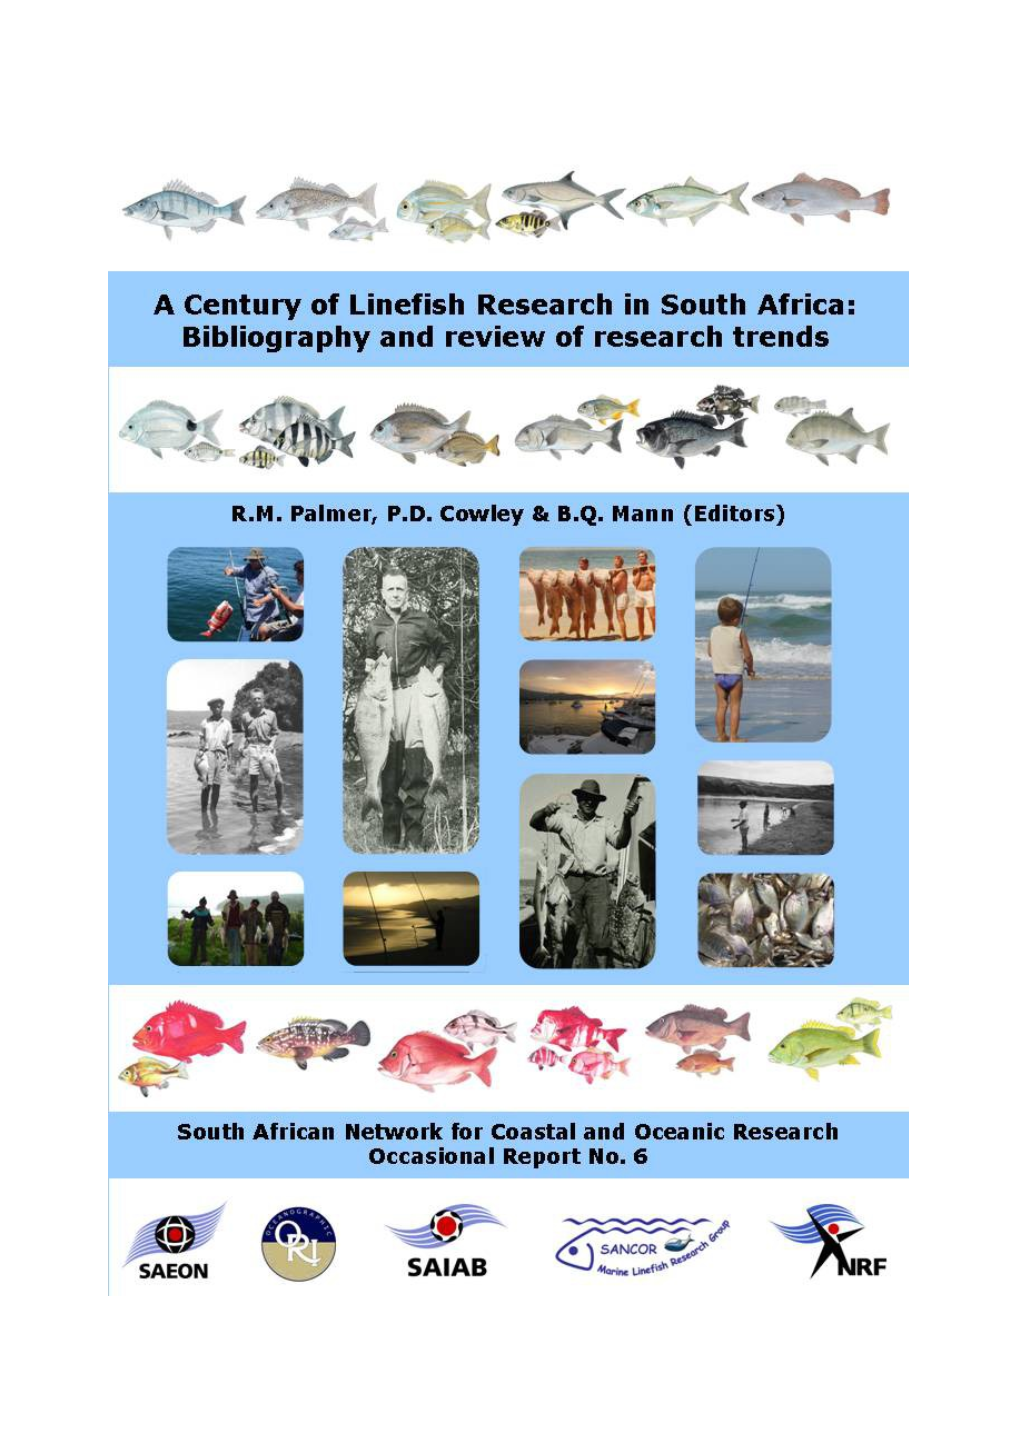 A Century of Linefish Research in South Africa: Bibliography and Review of Research Trends